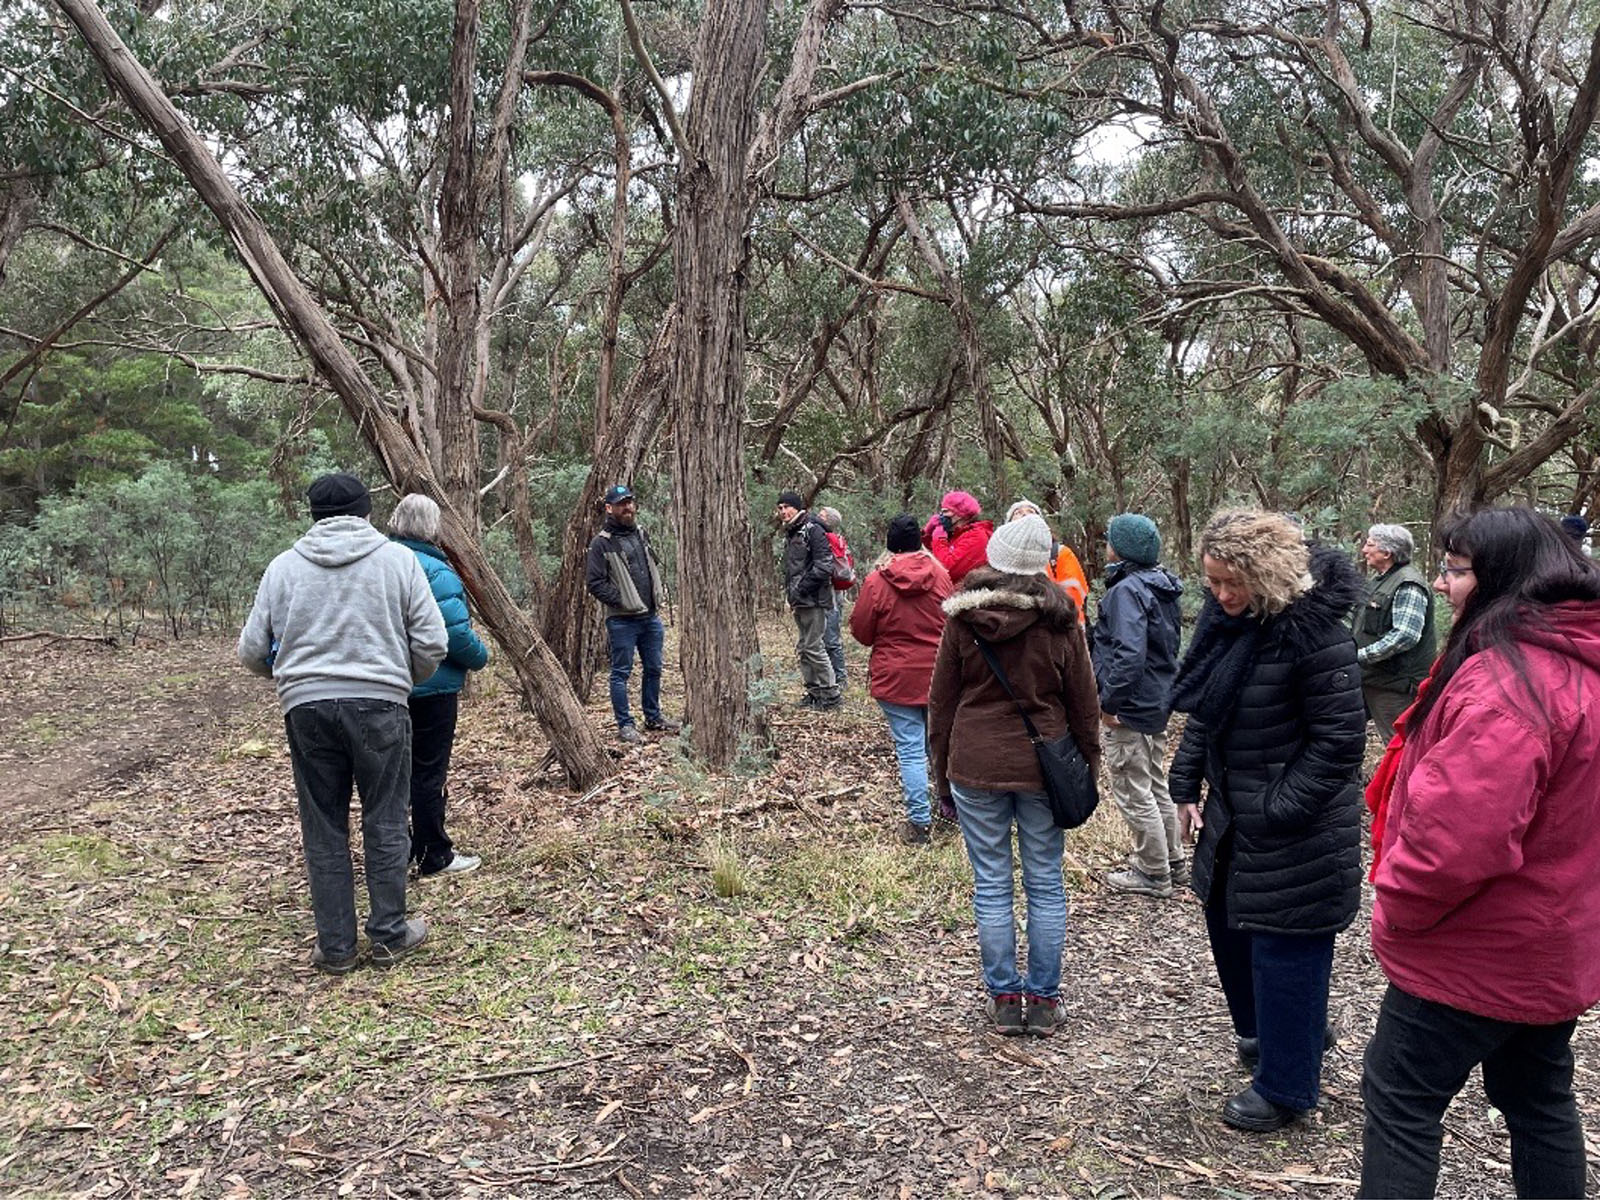 A group of people walking through a stand of trees